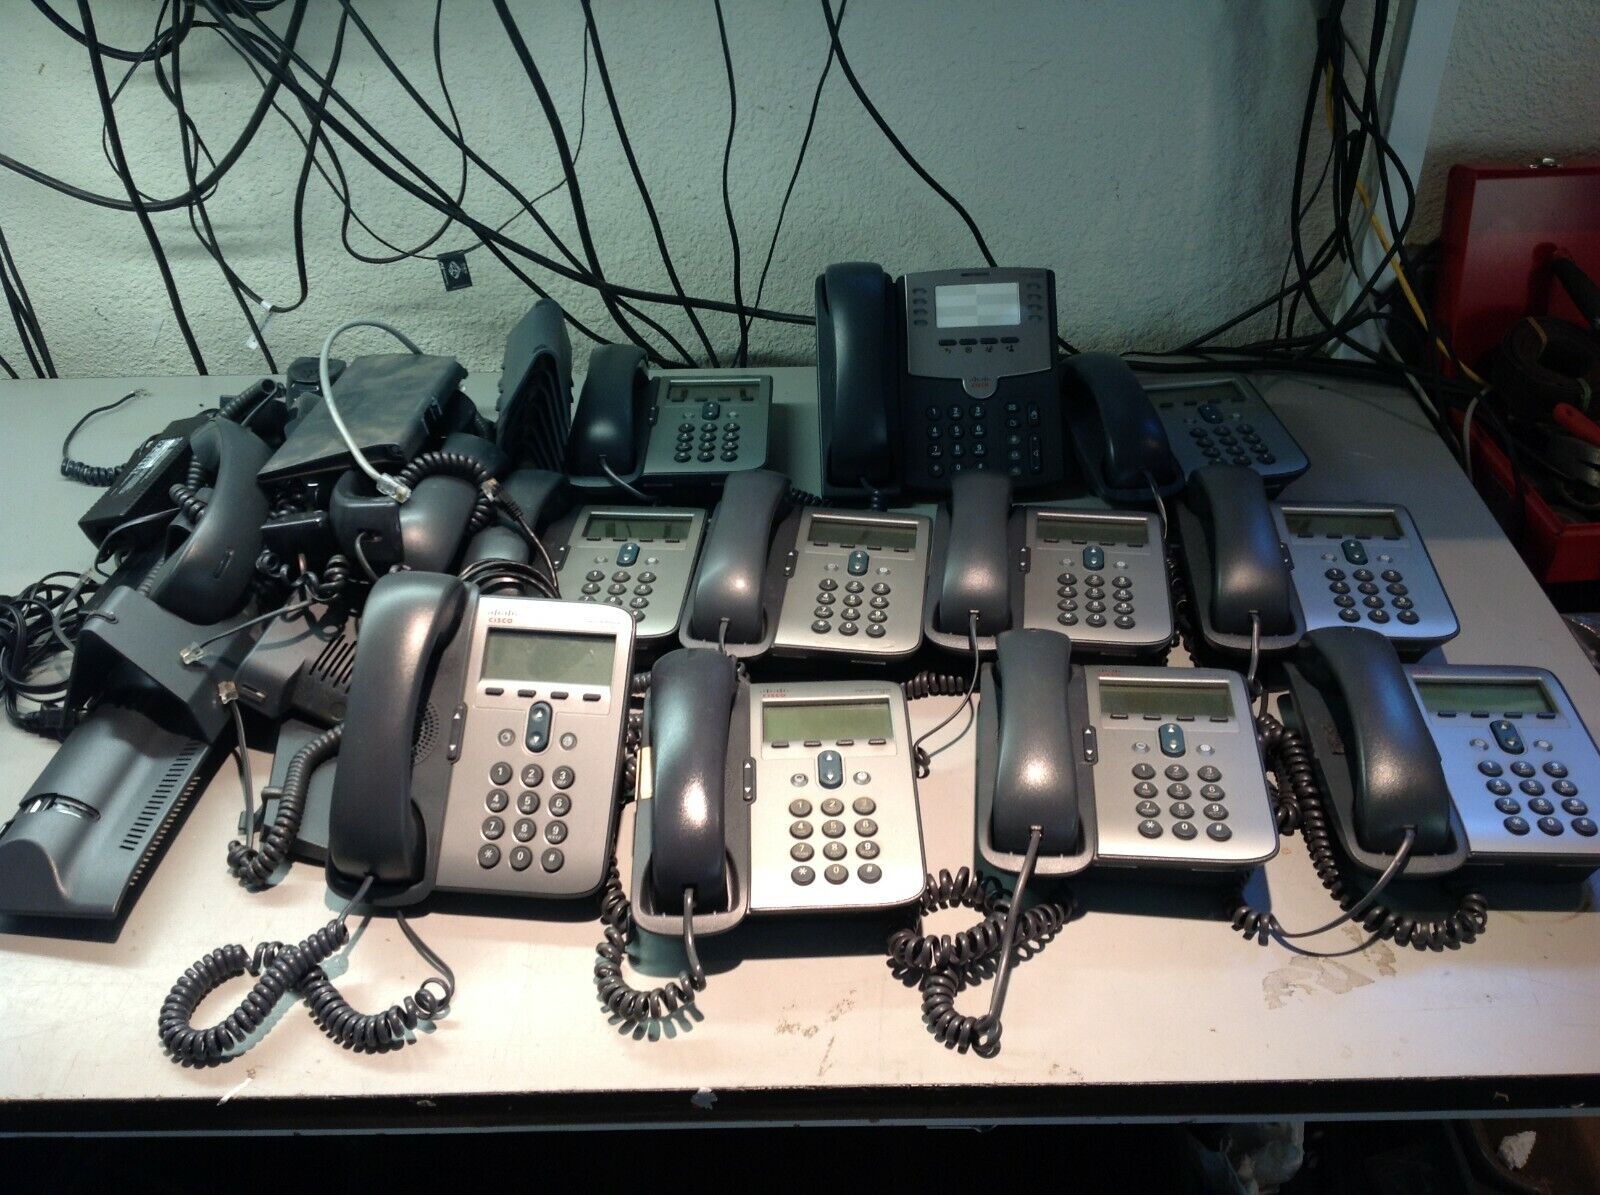 Lot of 10 Cisco CP-7911G UNIFIED IP PHONE 7911 VoIP PHONE with extras